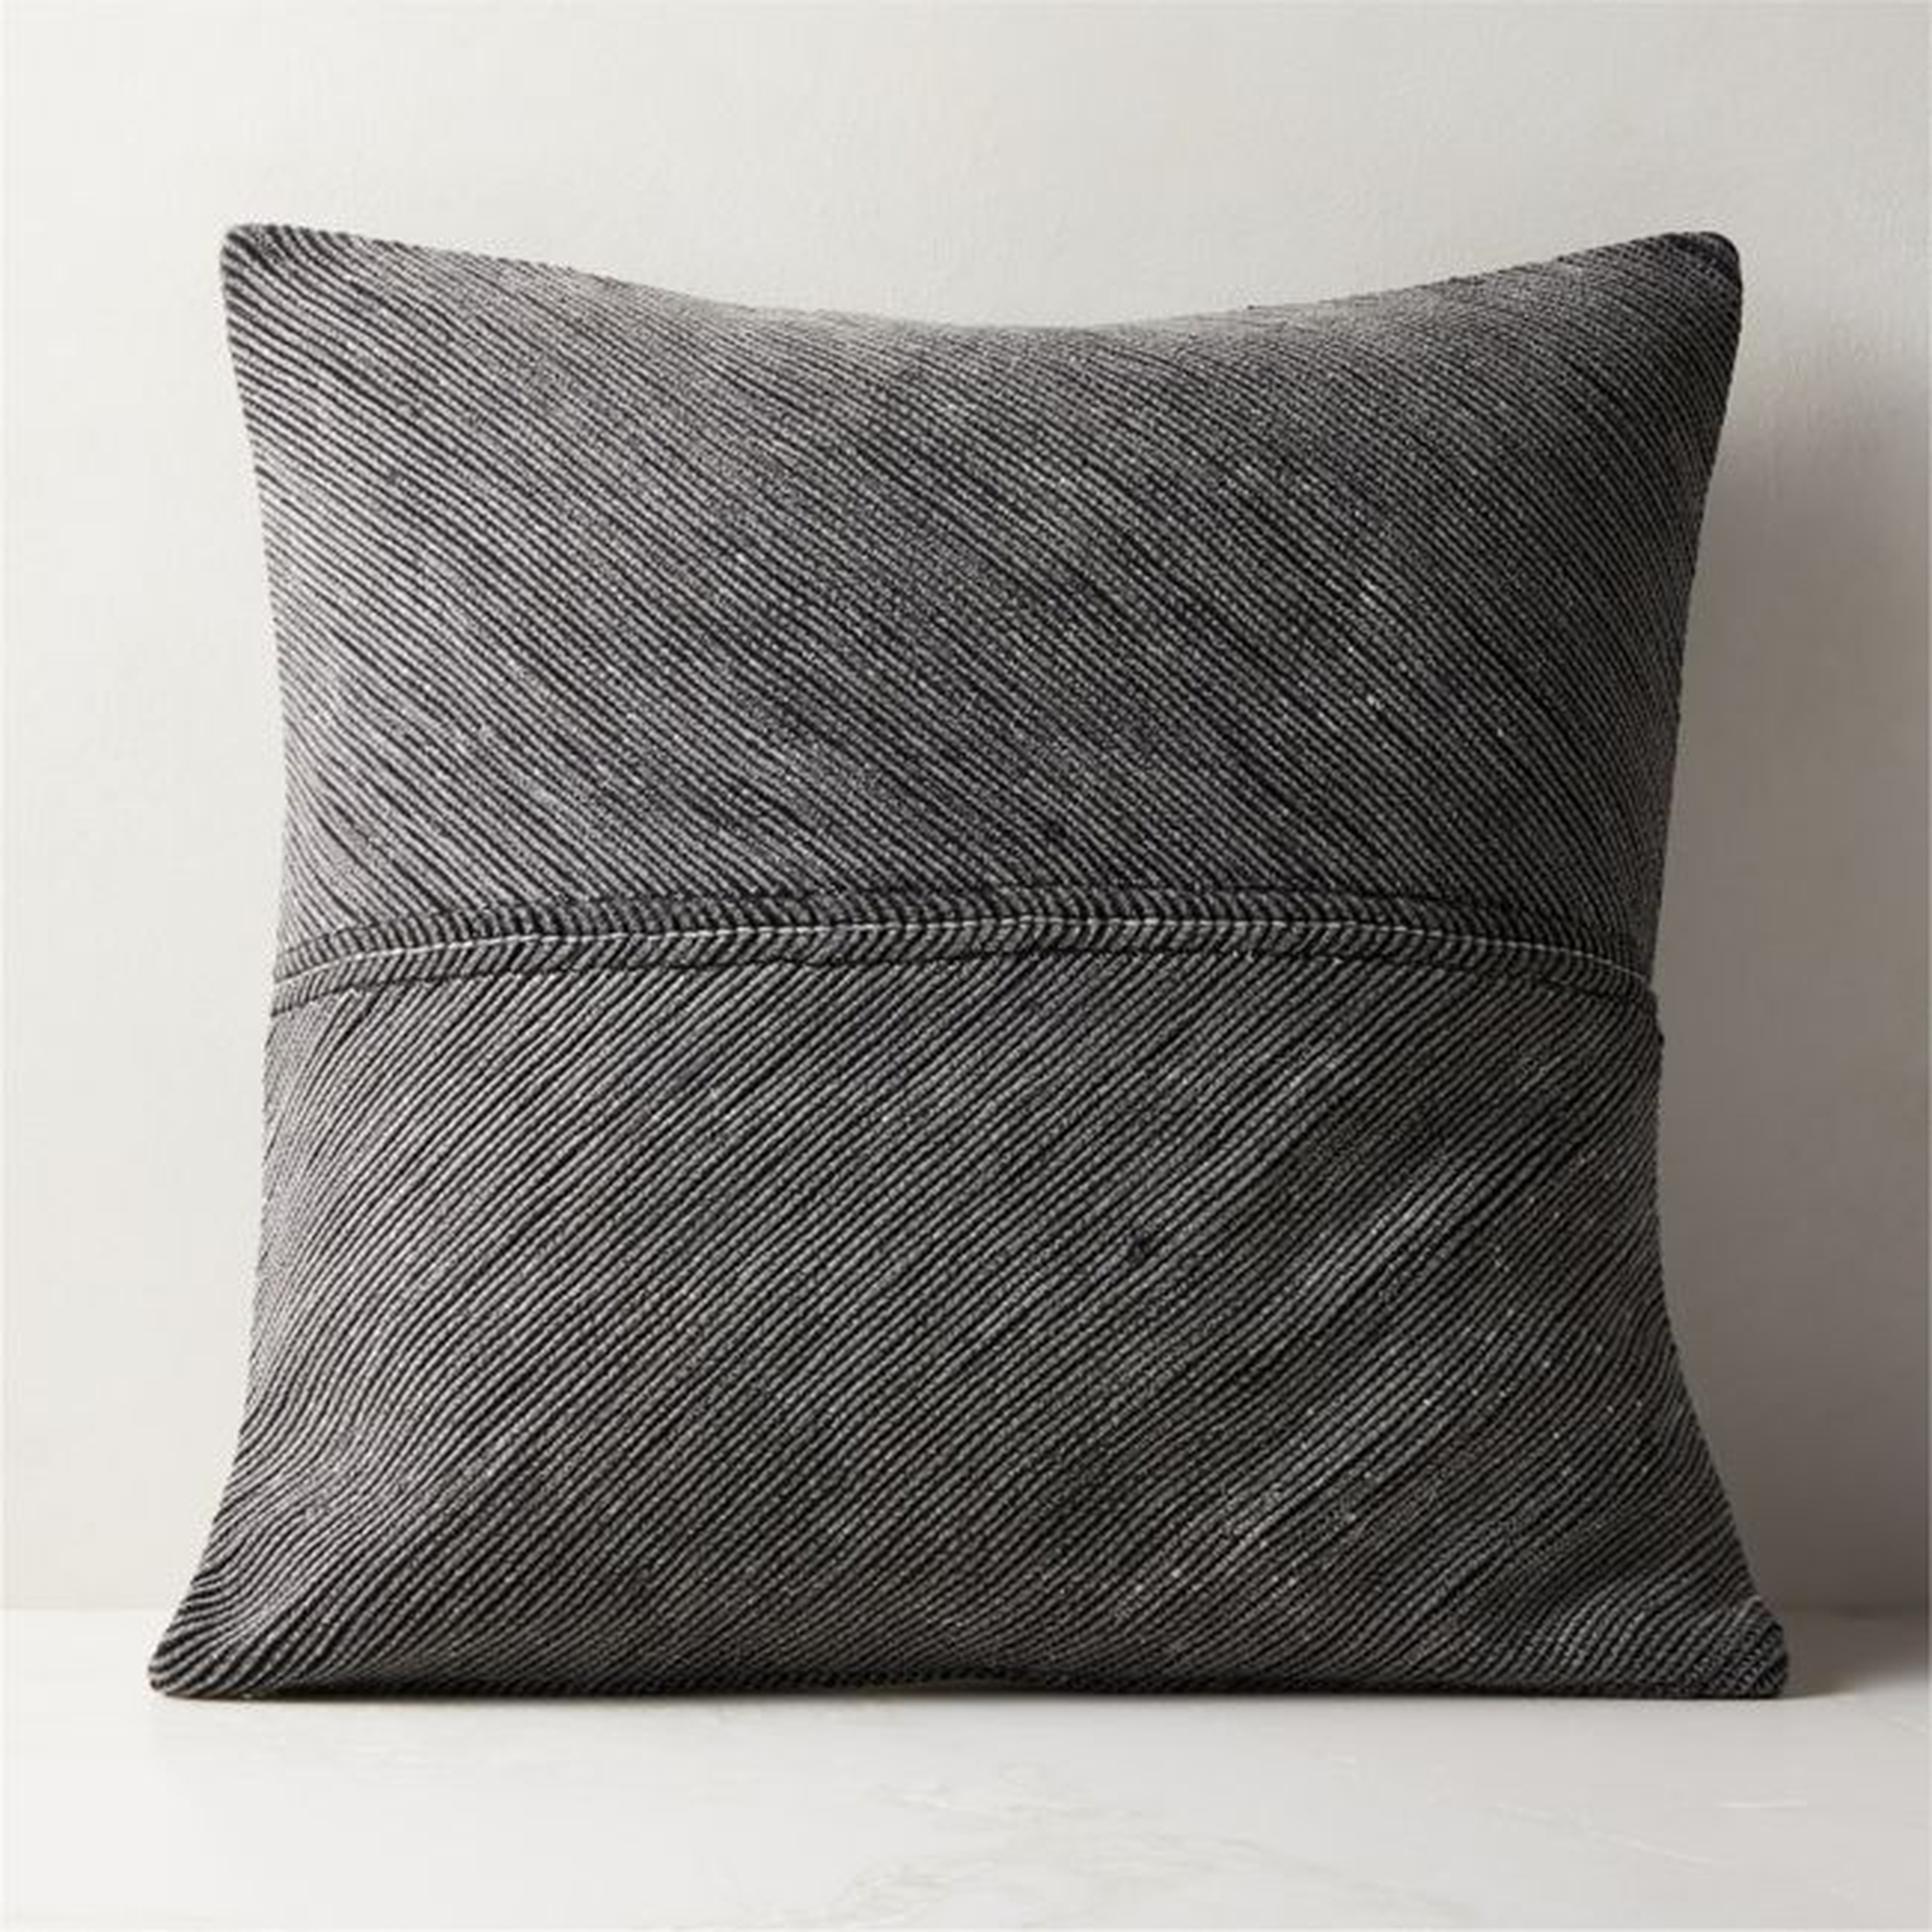 23" Convey Black Pillow With Feather-Down Insert - CB2